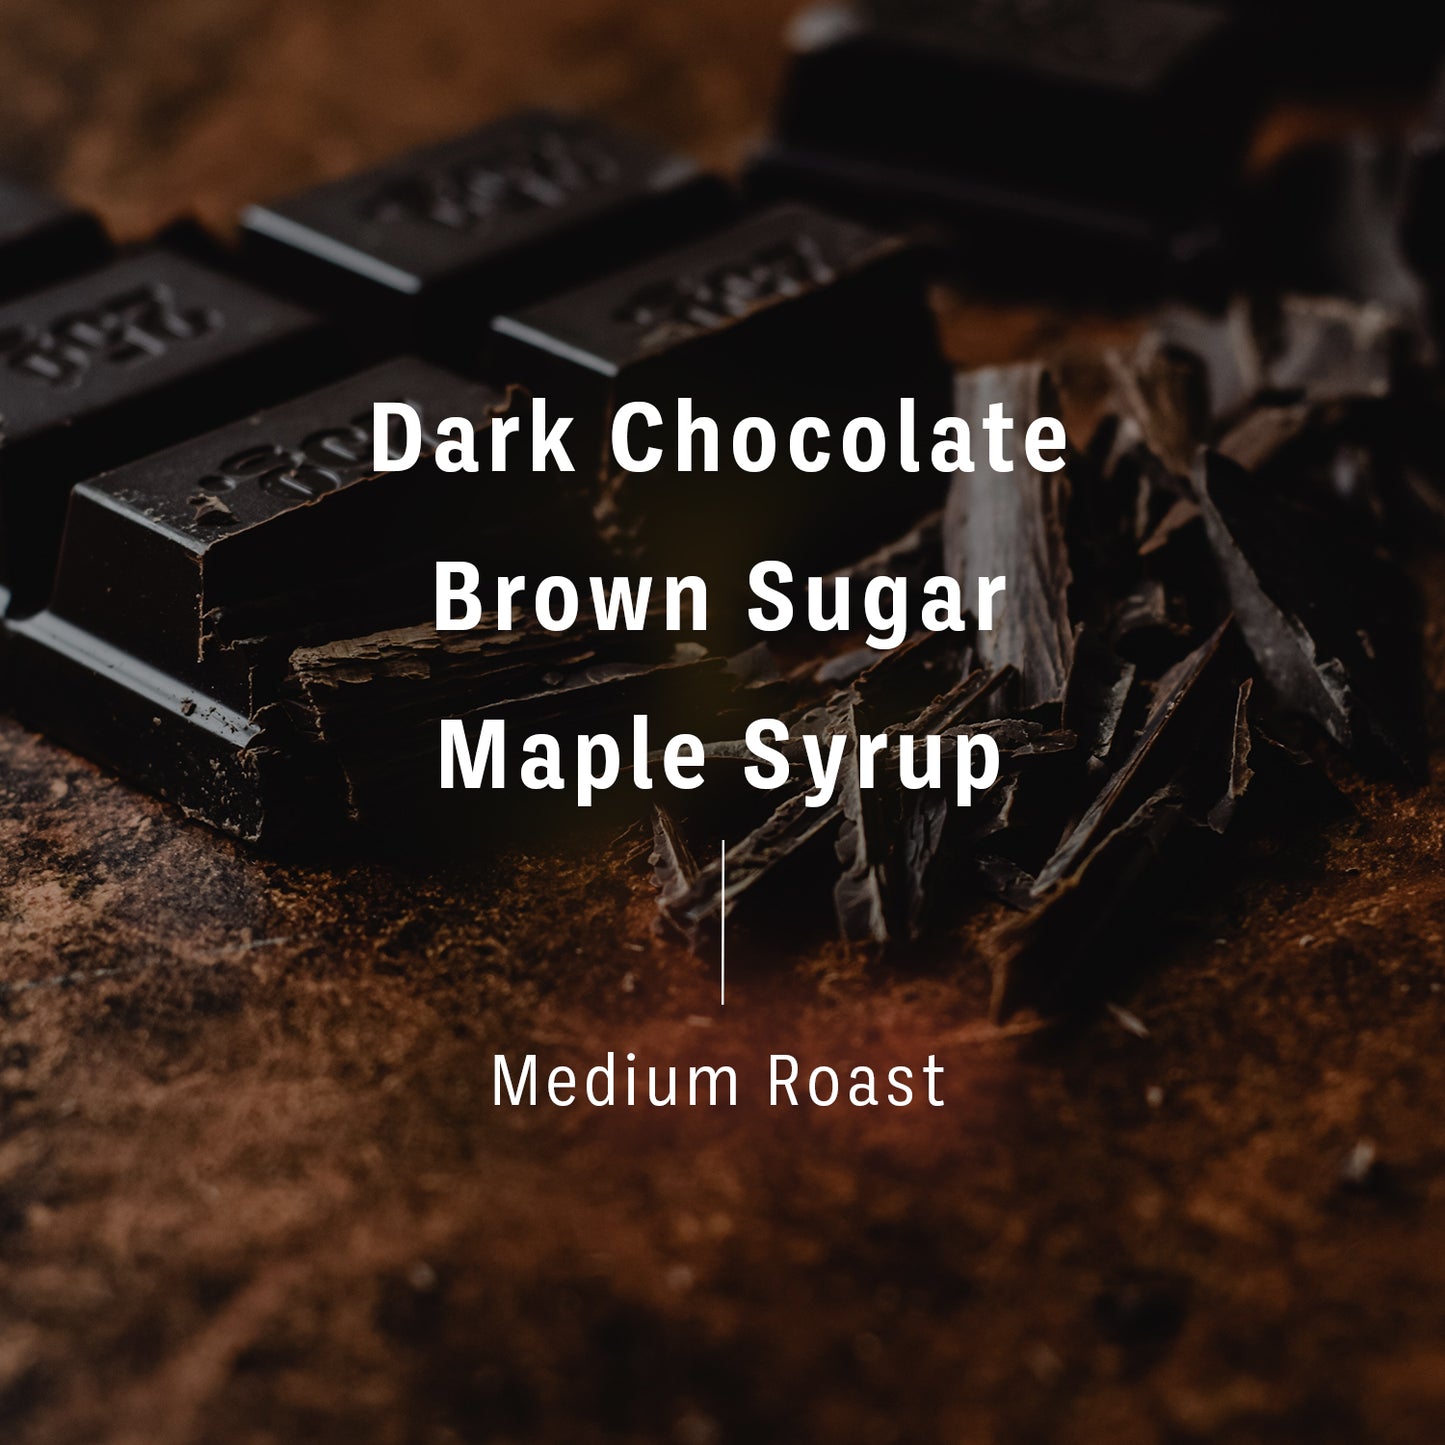 Flavor notes and roast level of Mexico organic chiapas coffee beans imposed on background of shaved chocolate. Text reads, “Dark Chocolate, Brown Sugar, Maple Syrup, Medium Roast," 2 of 4.